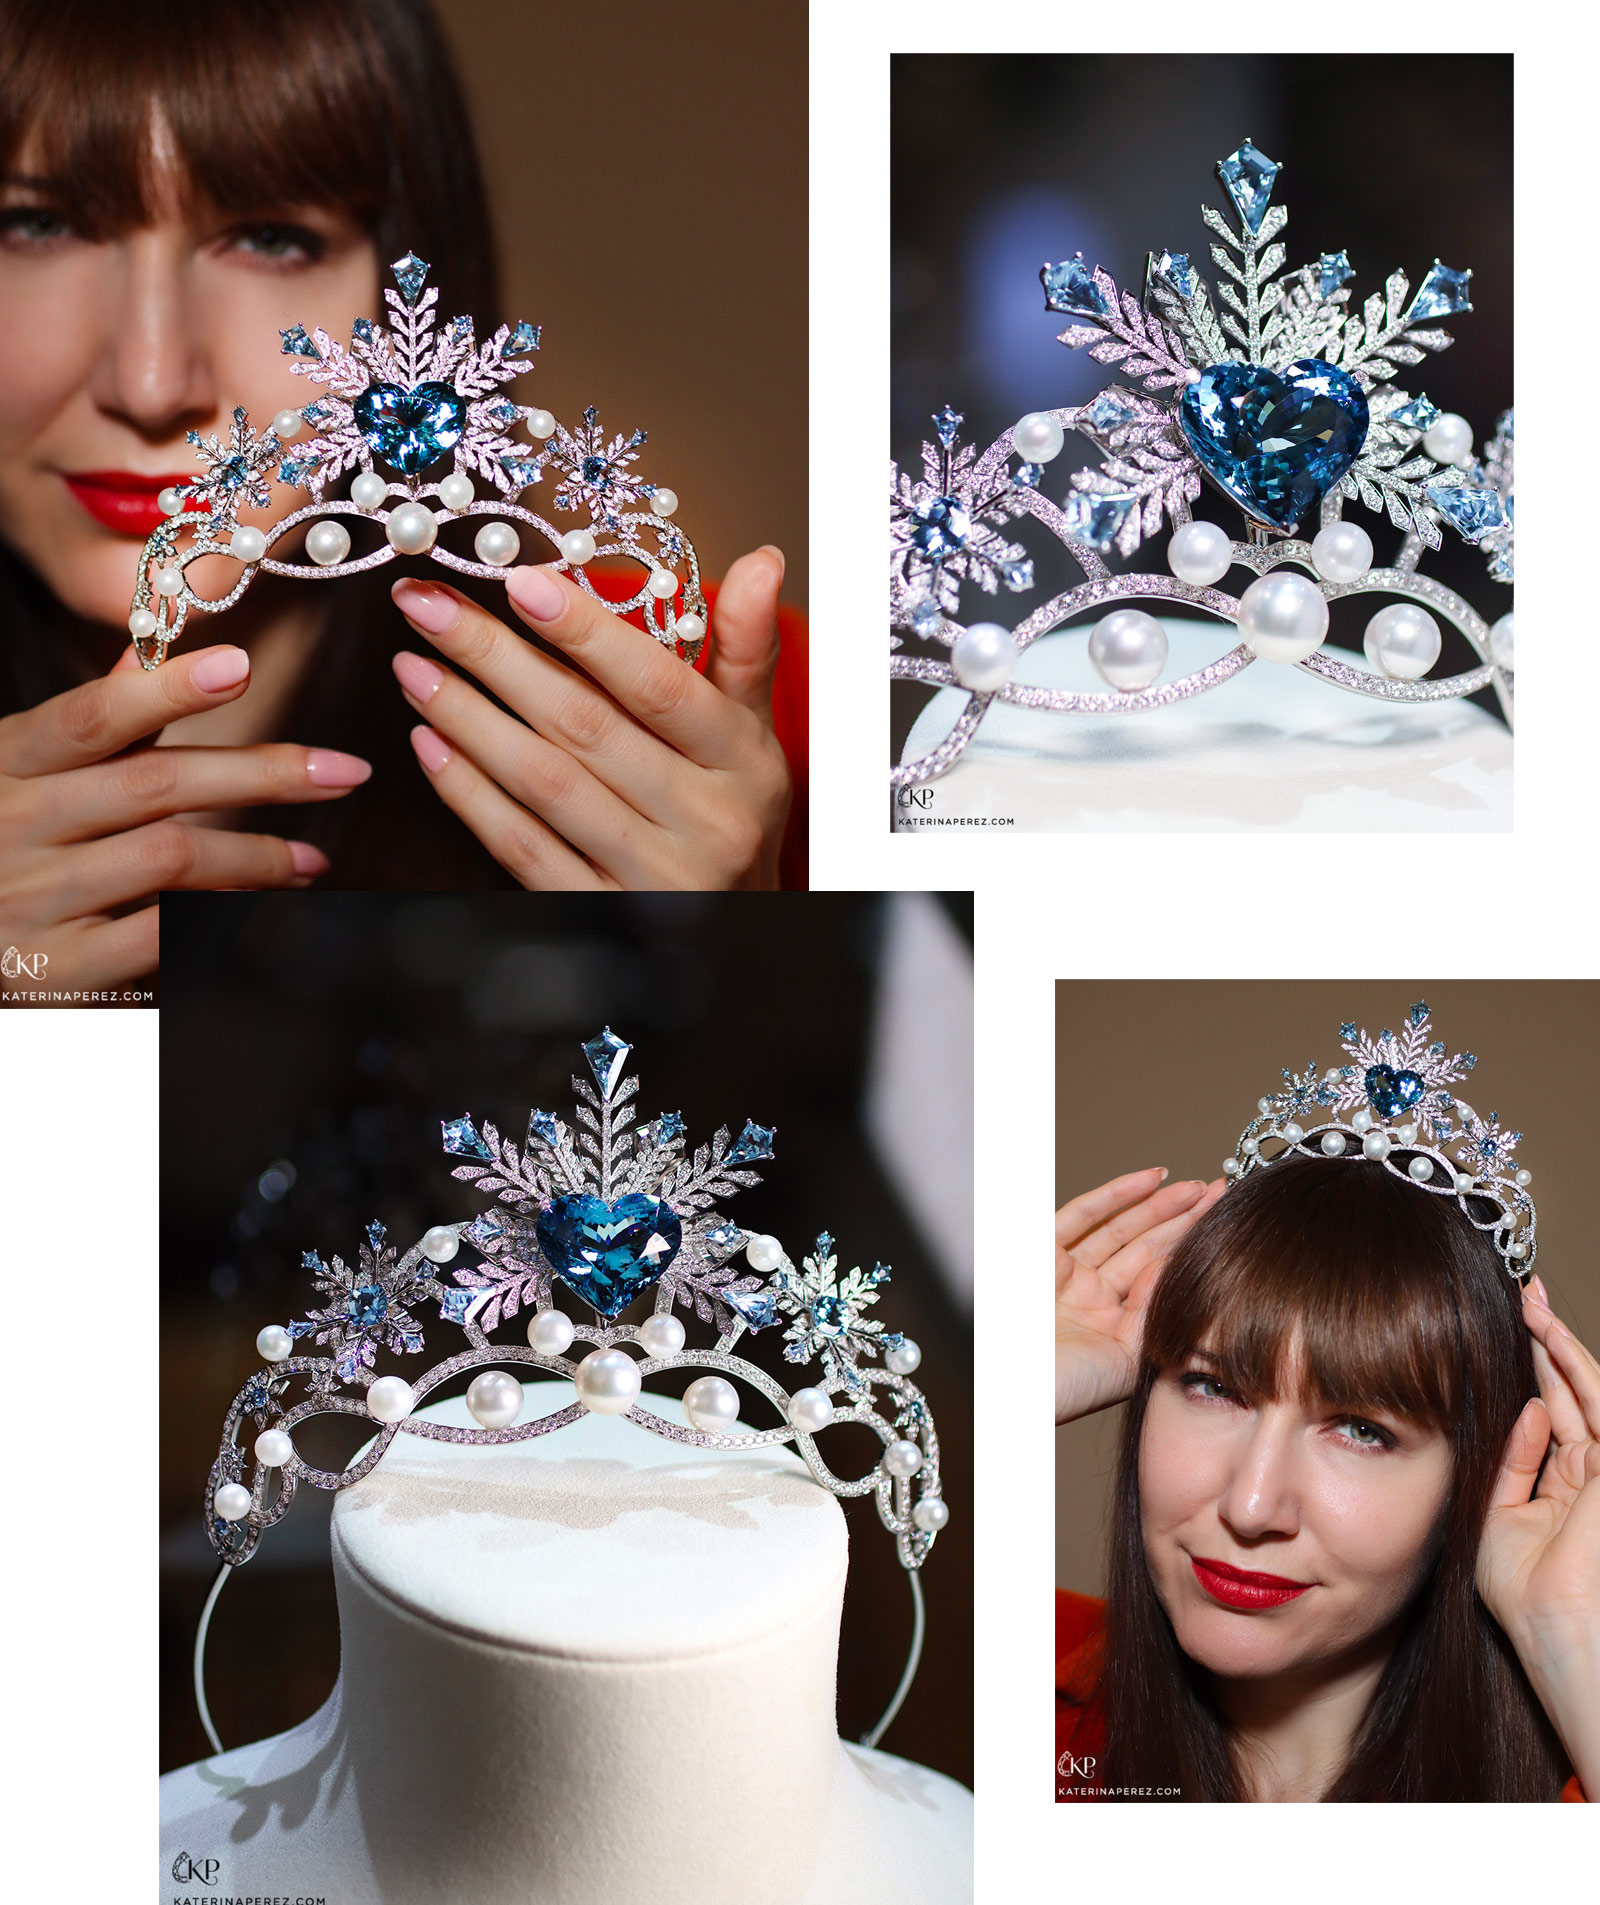 Katerina Perez wears the Serendipity Jewelry Snow Queen tiara with Santa Maria-coloured aquamarines, diamonds, and South Sea pearls surrounding a large heart-shaped aquamarine 